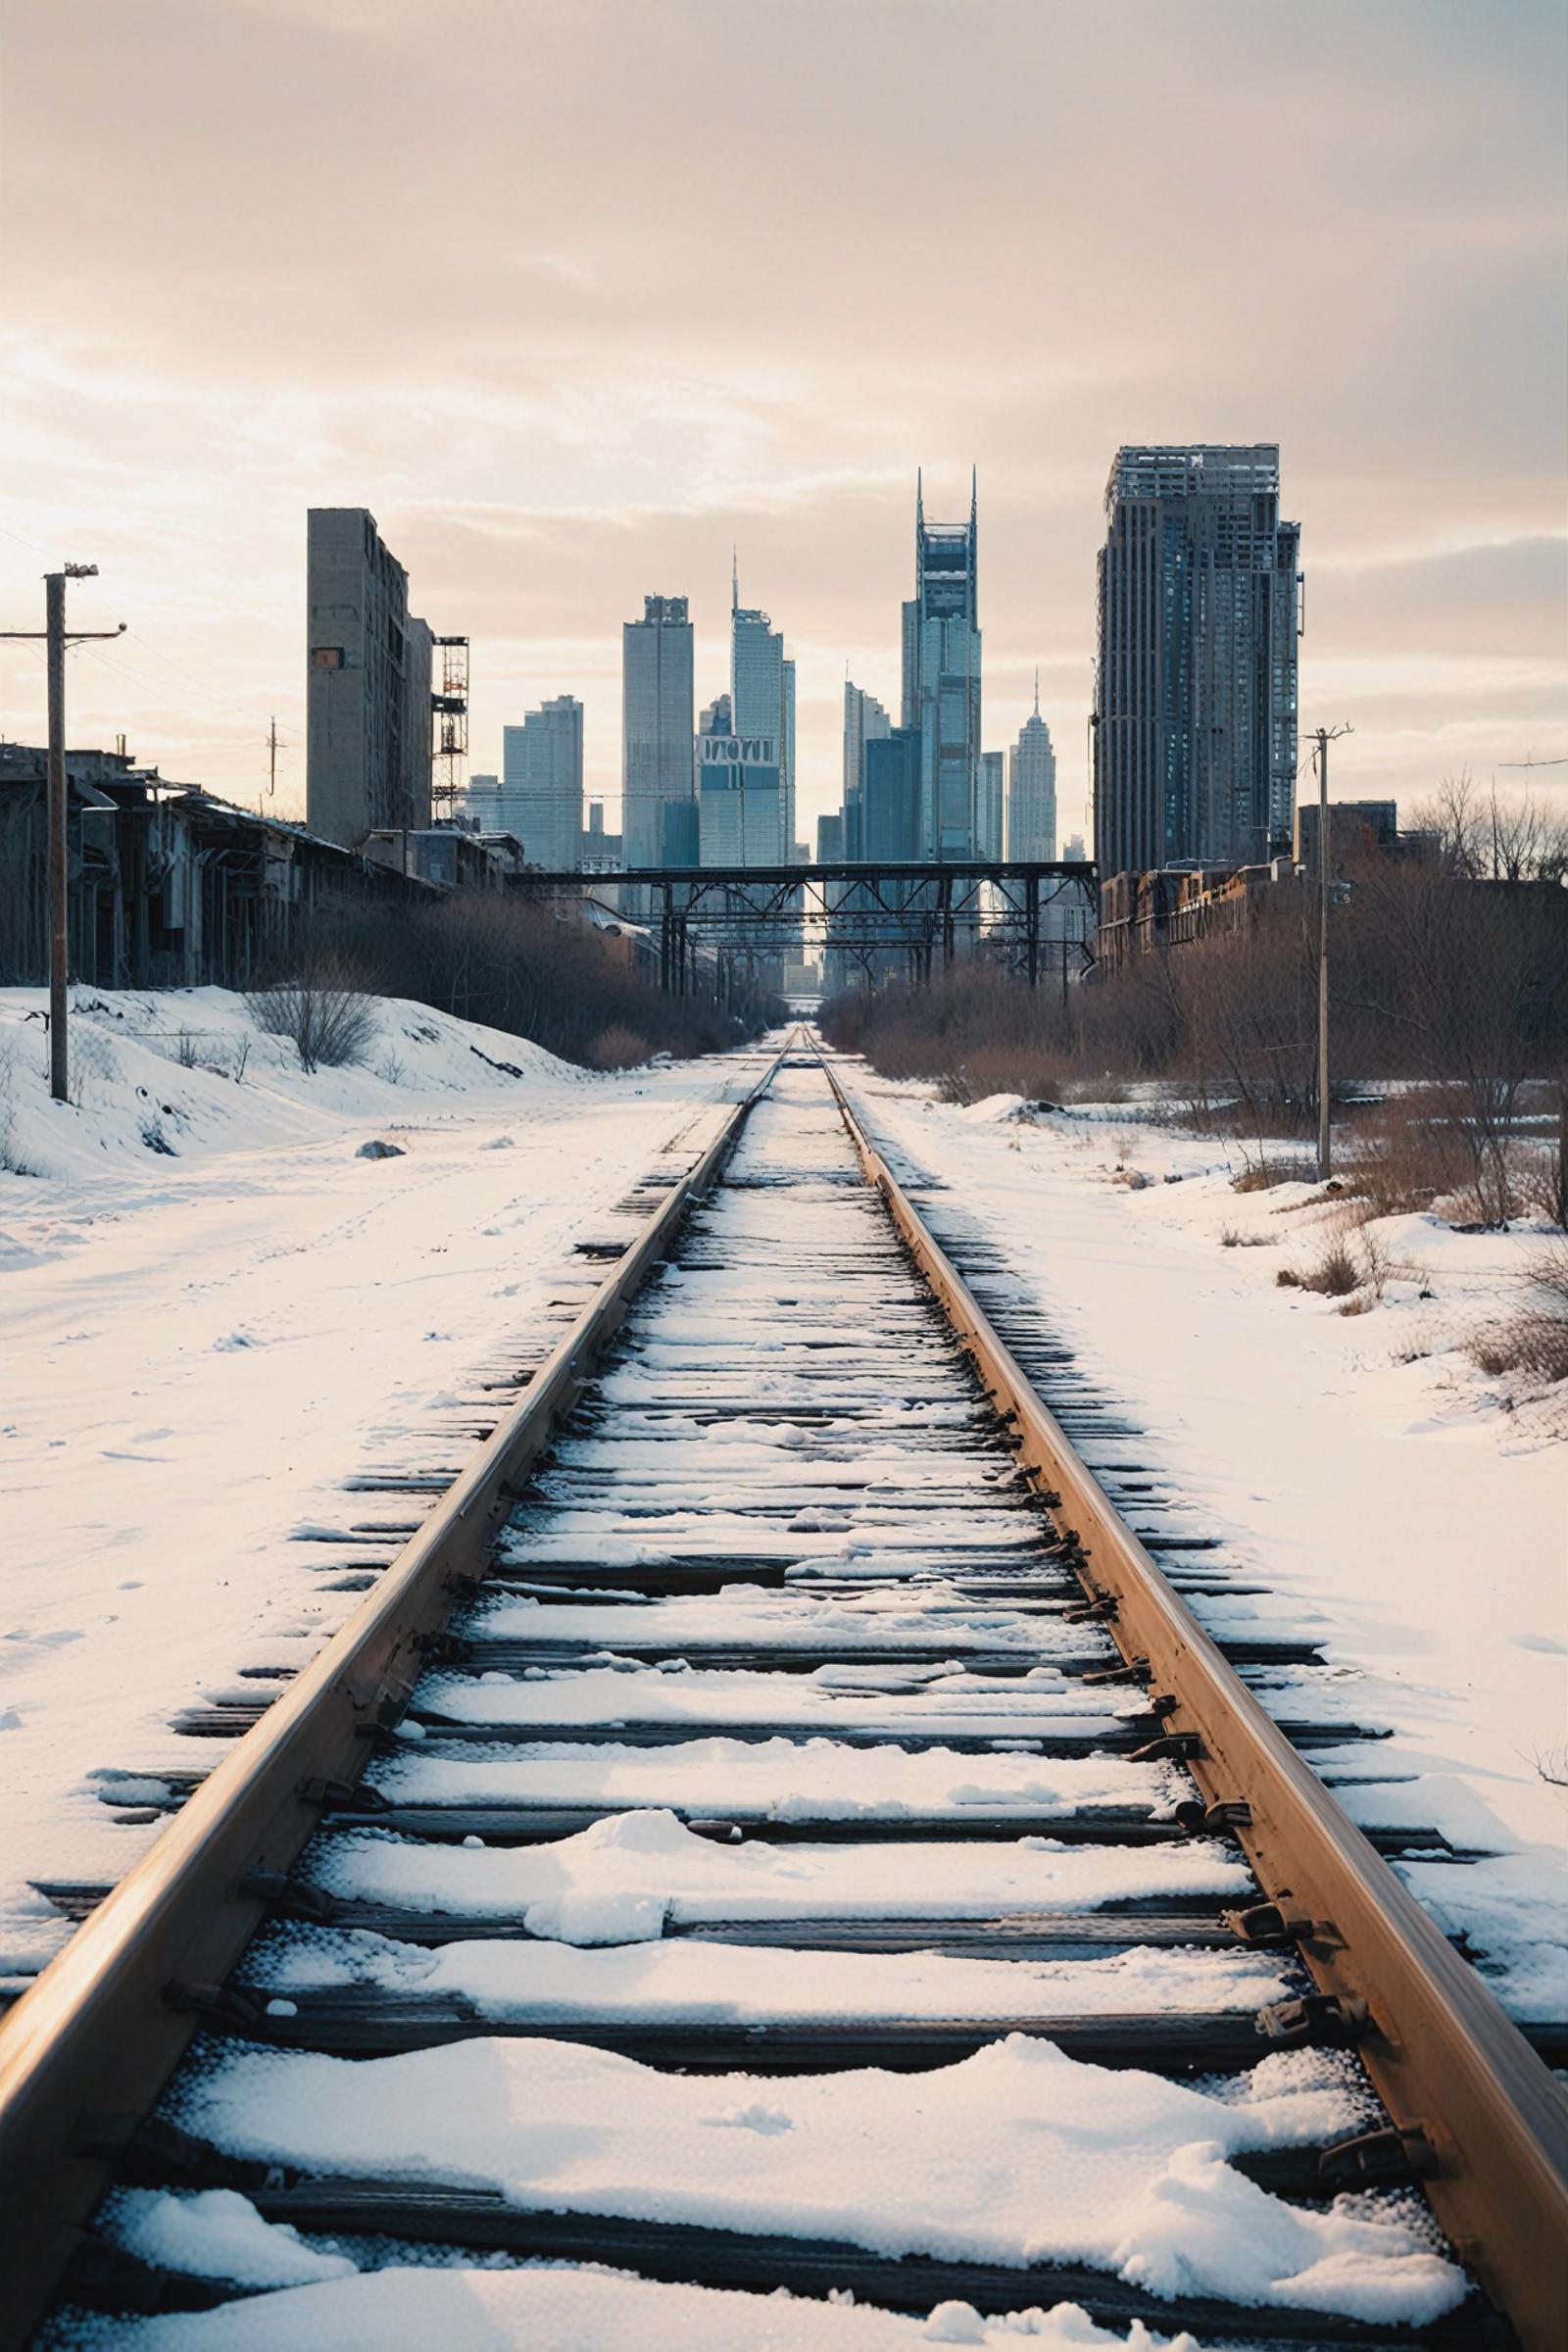 Snowy Railroad Tracks Leading to City Skyscrapers